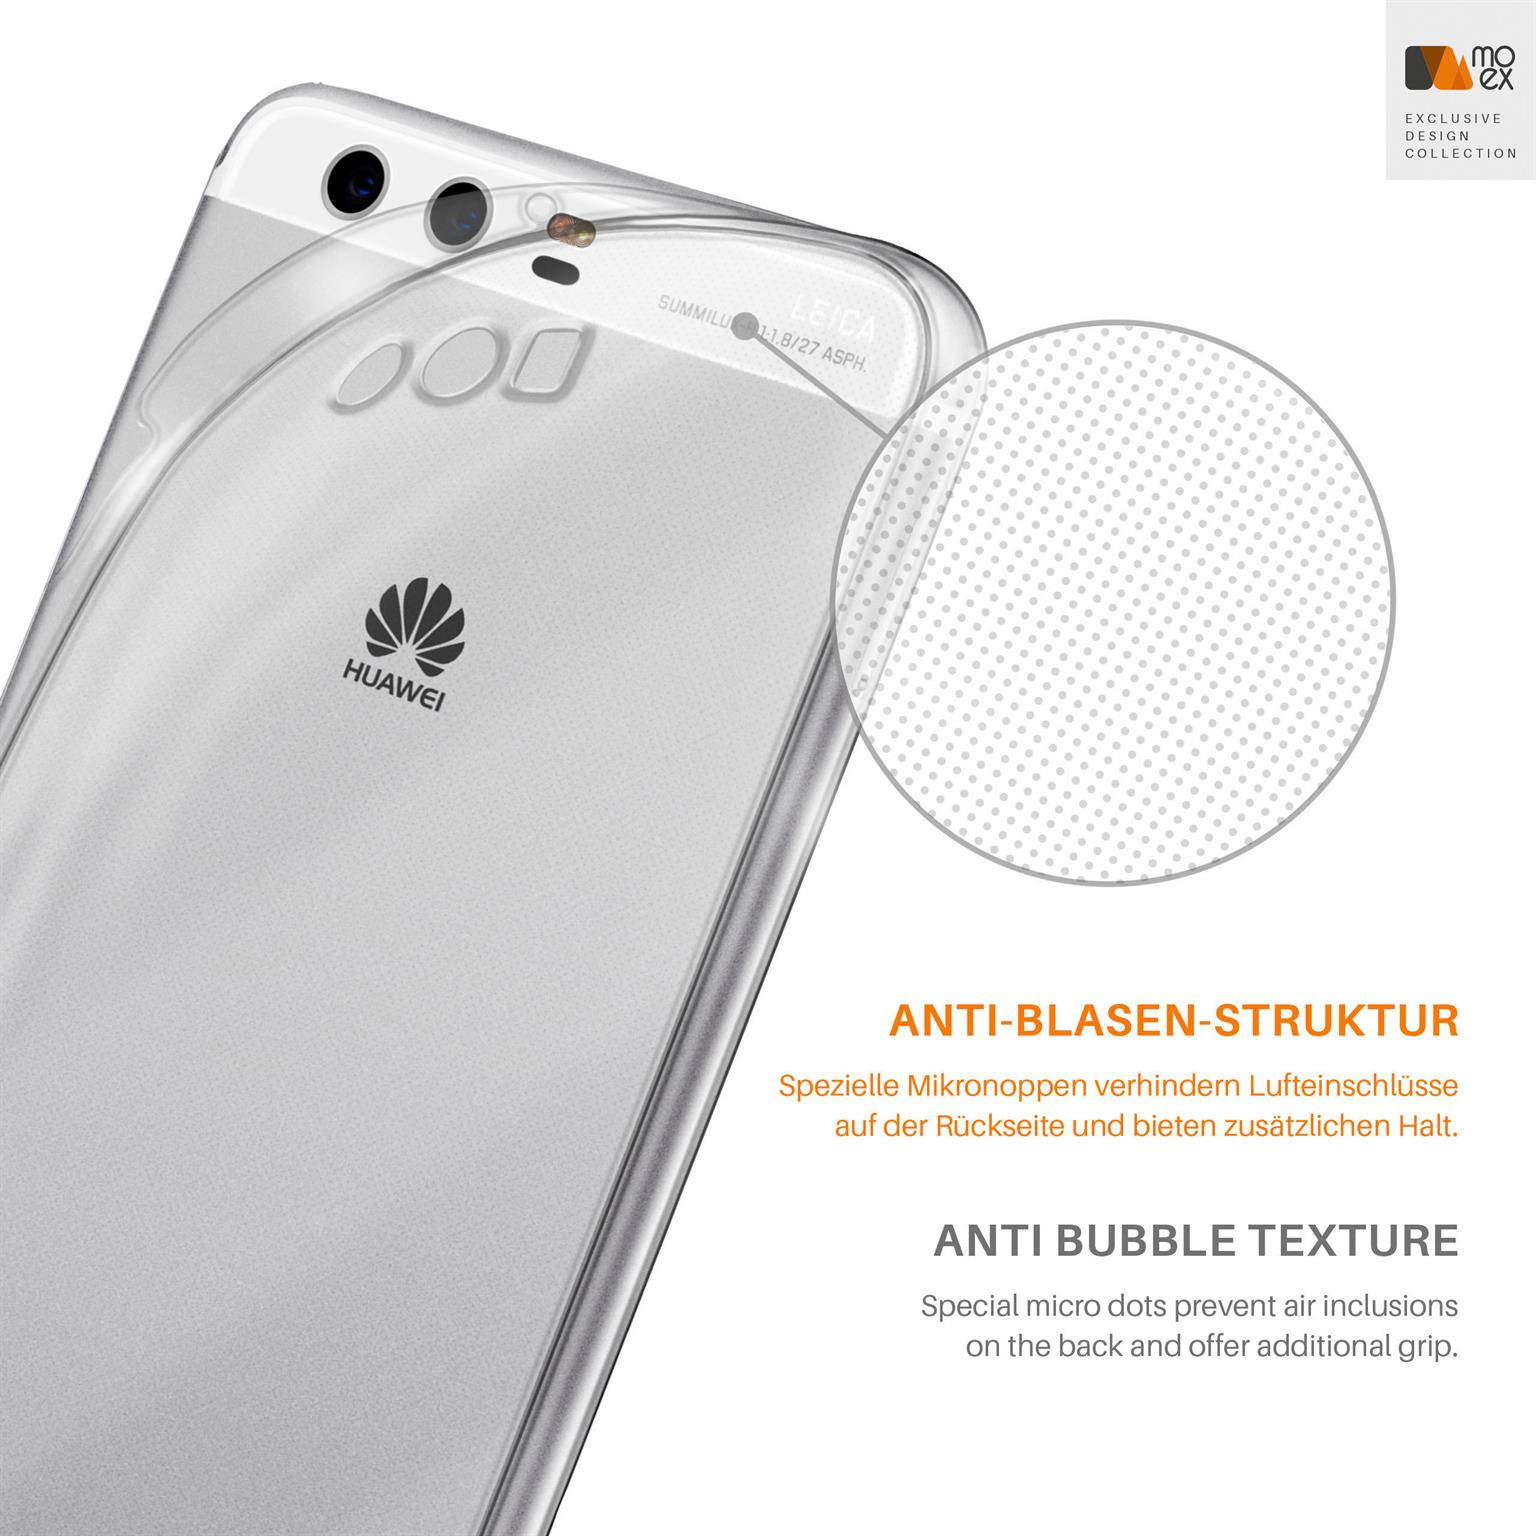 MOEX Aero Case, P10, Backcover, Huawei, Crystal-Clear